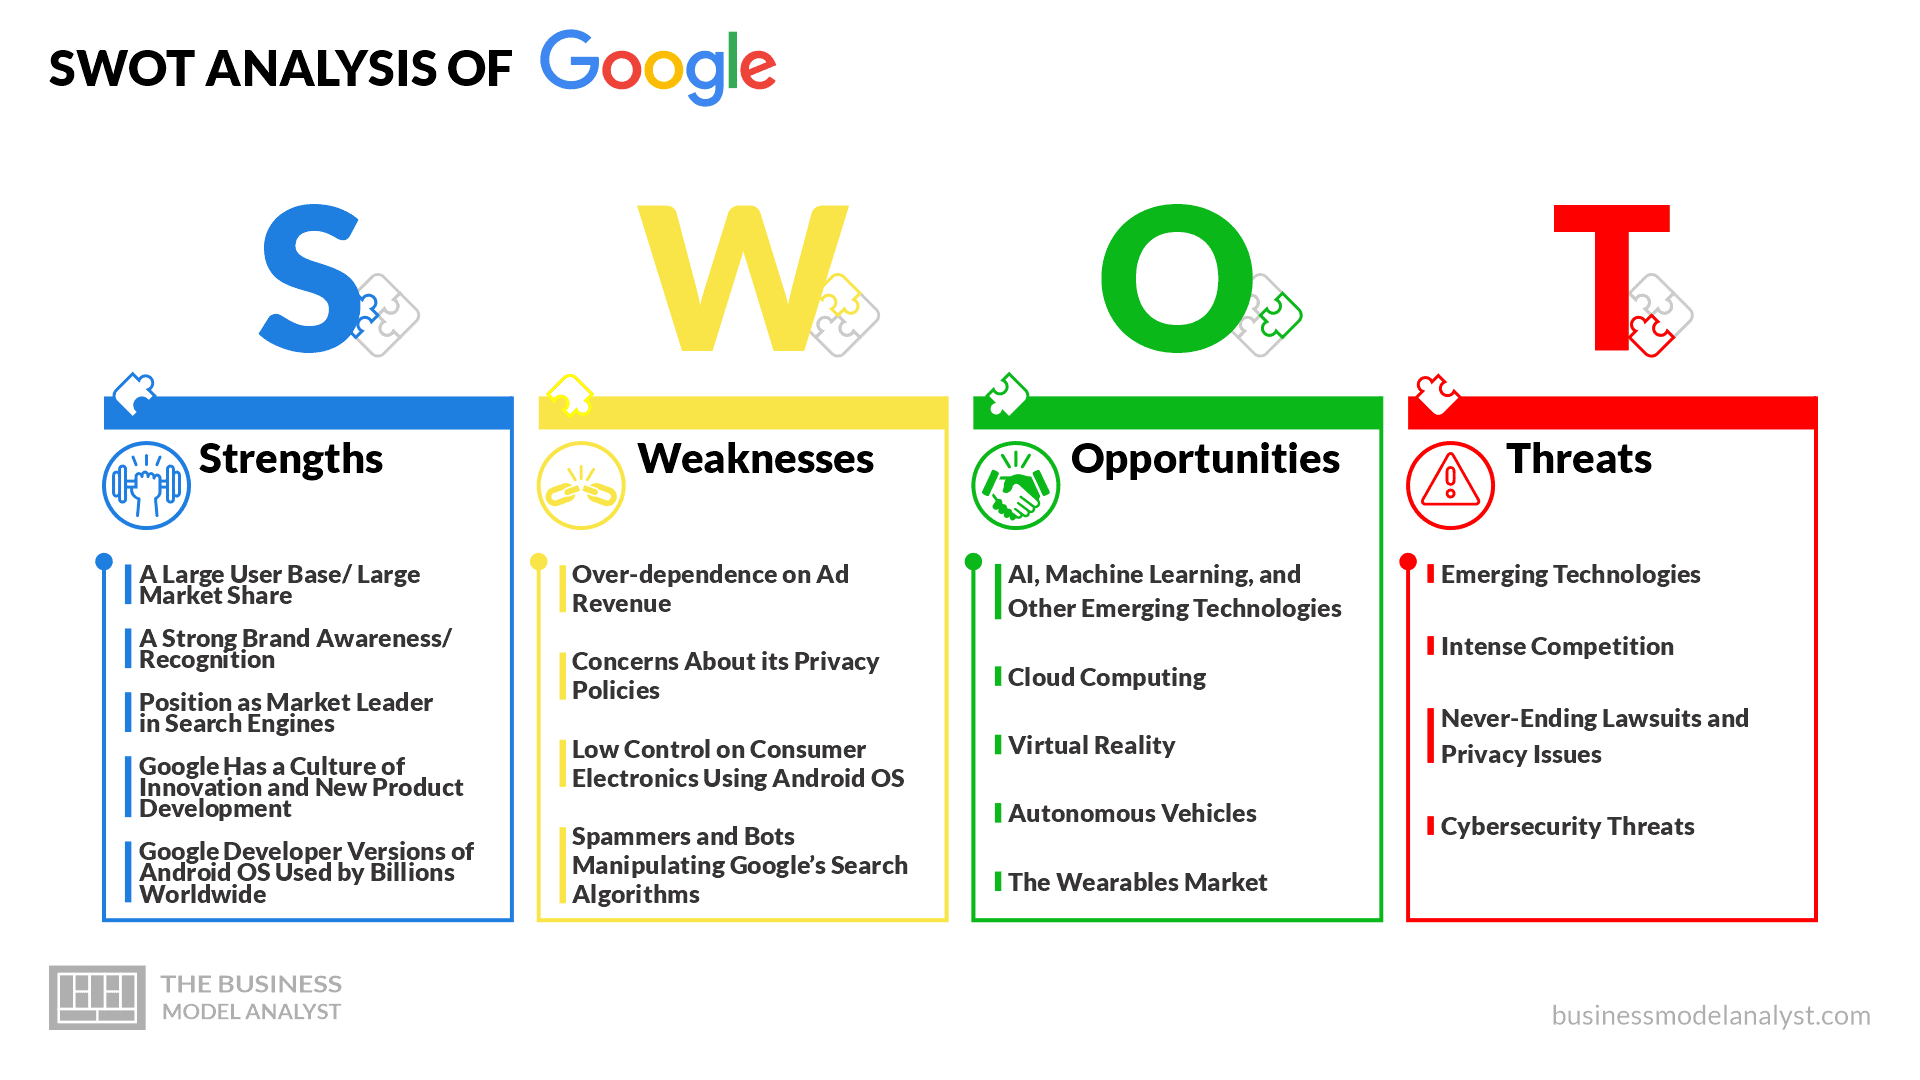 A strengths and weaknesses chart I made because I was having